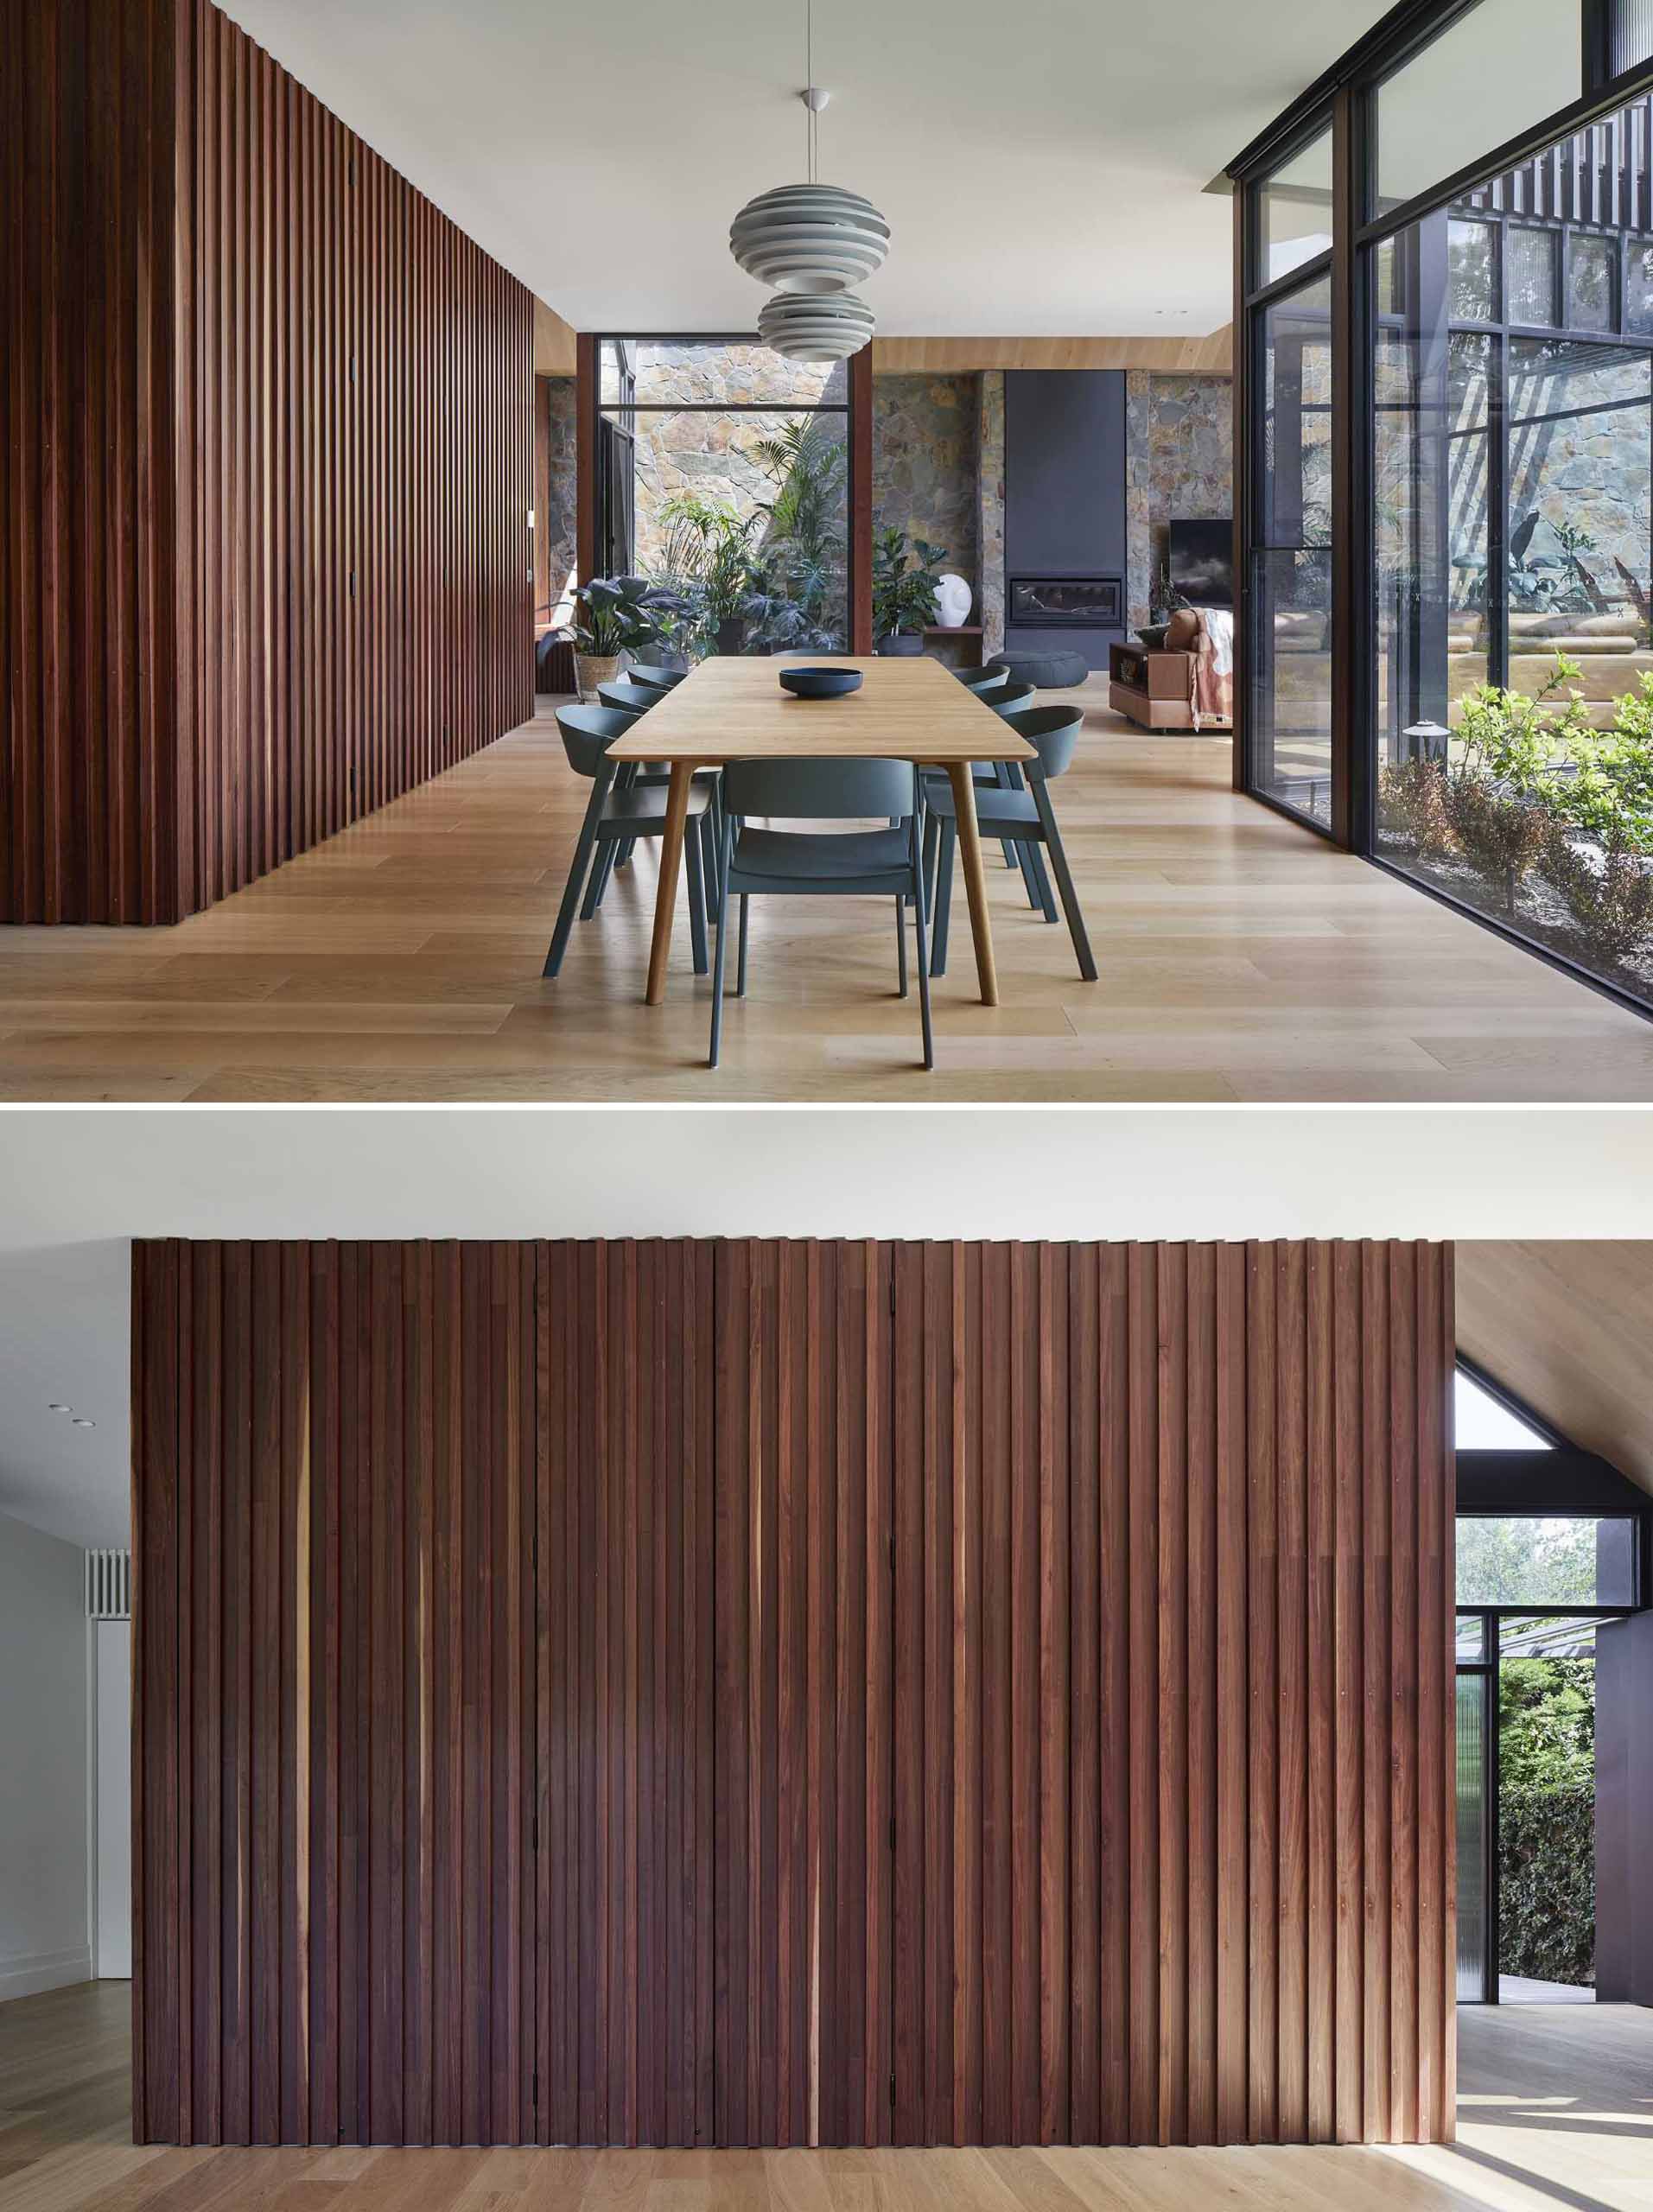 A modern home interior includes a wood accent wall in the dining room that opens to reveal a hidden office for two.